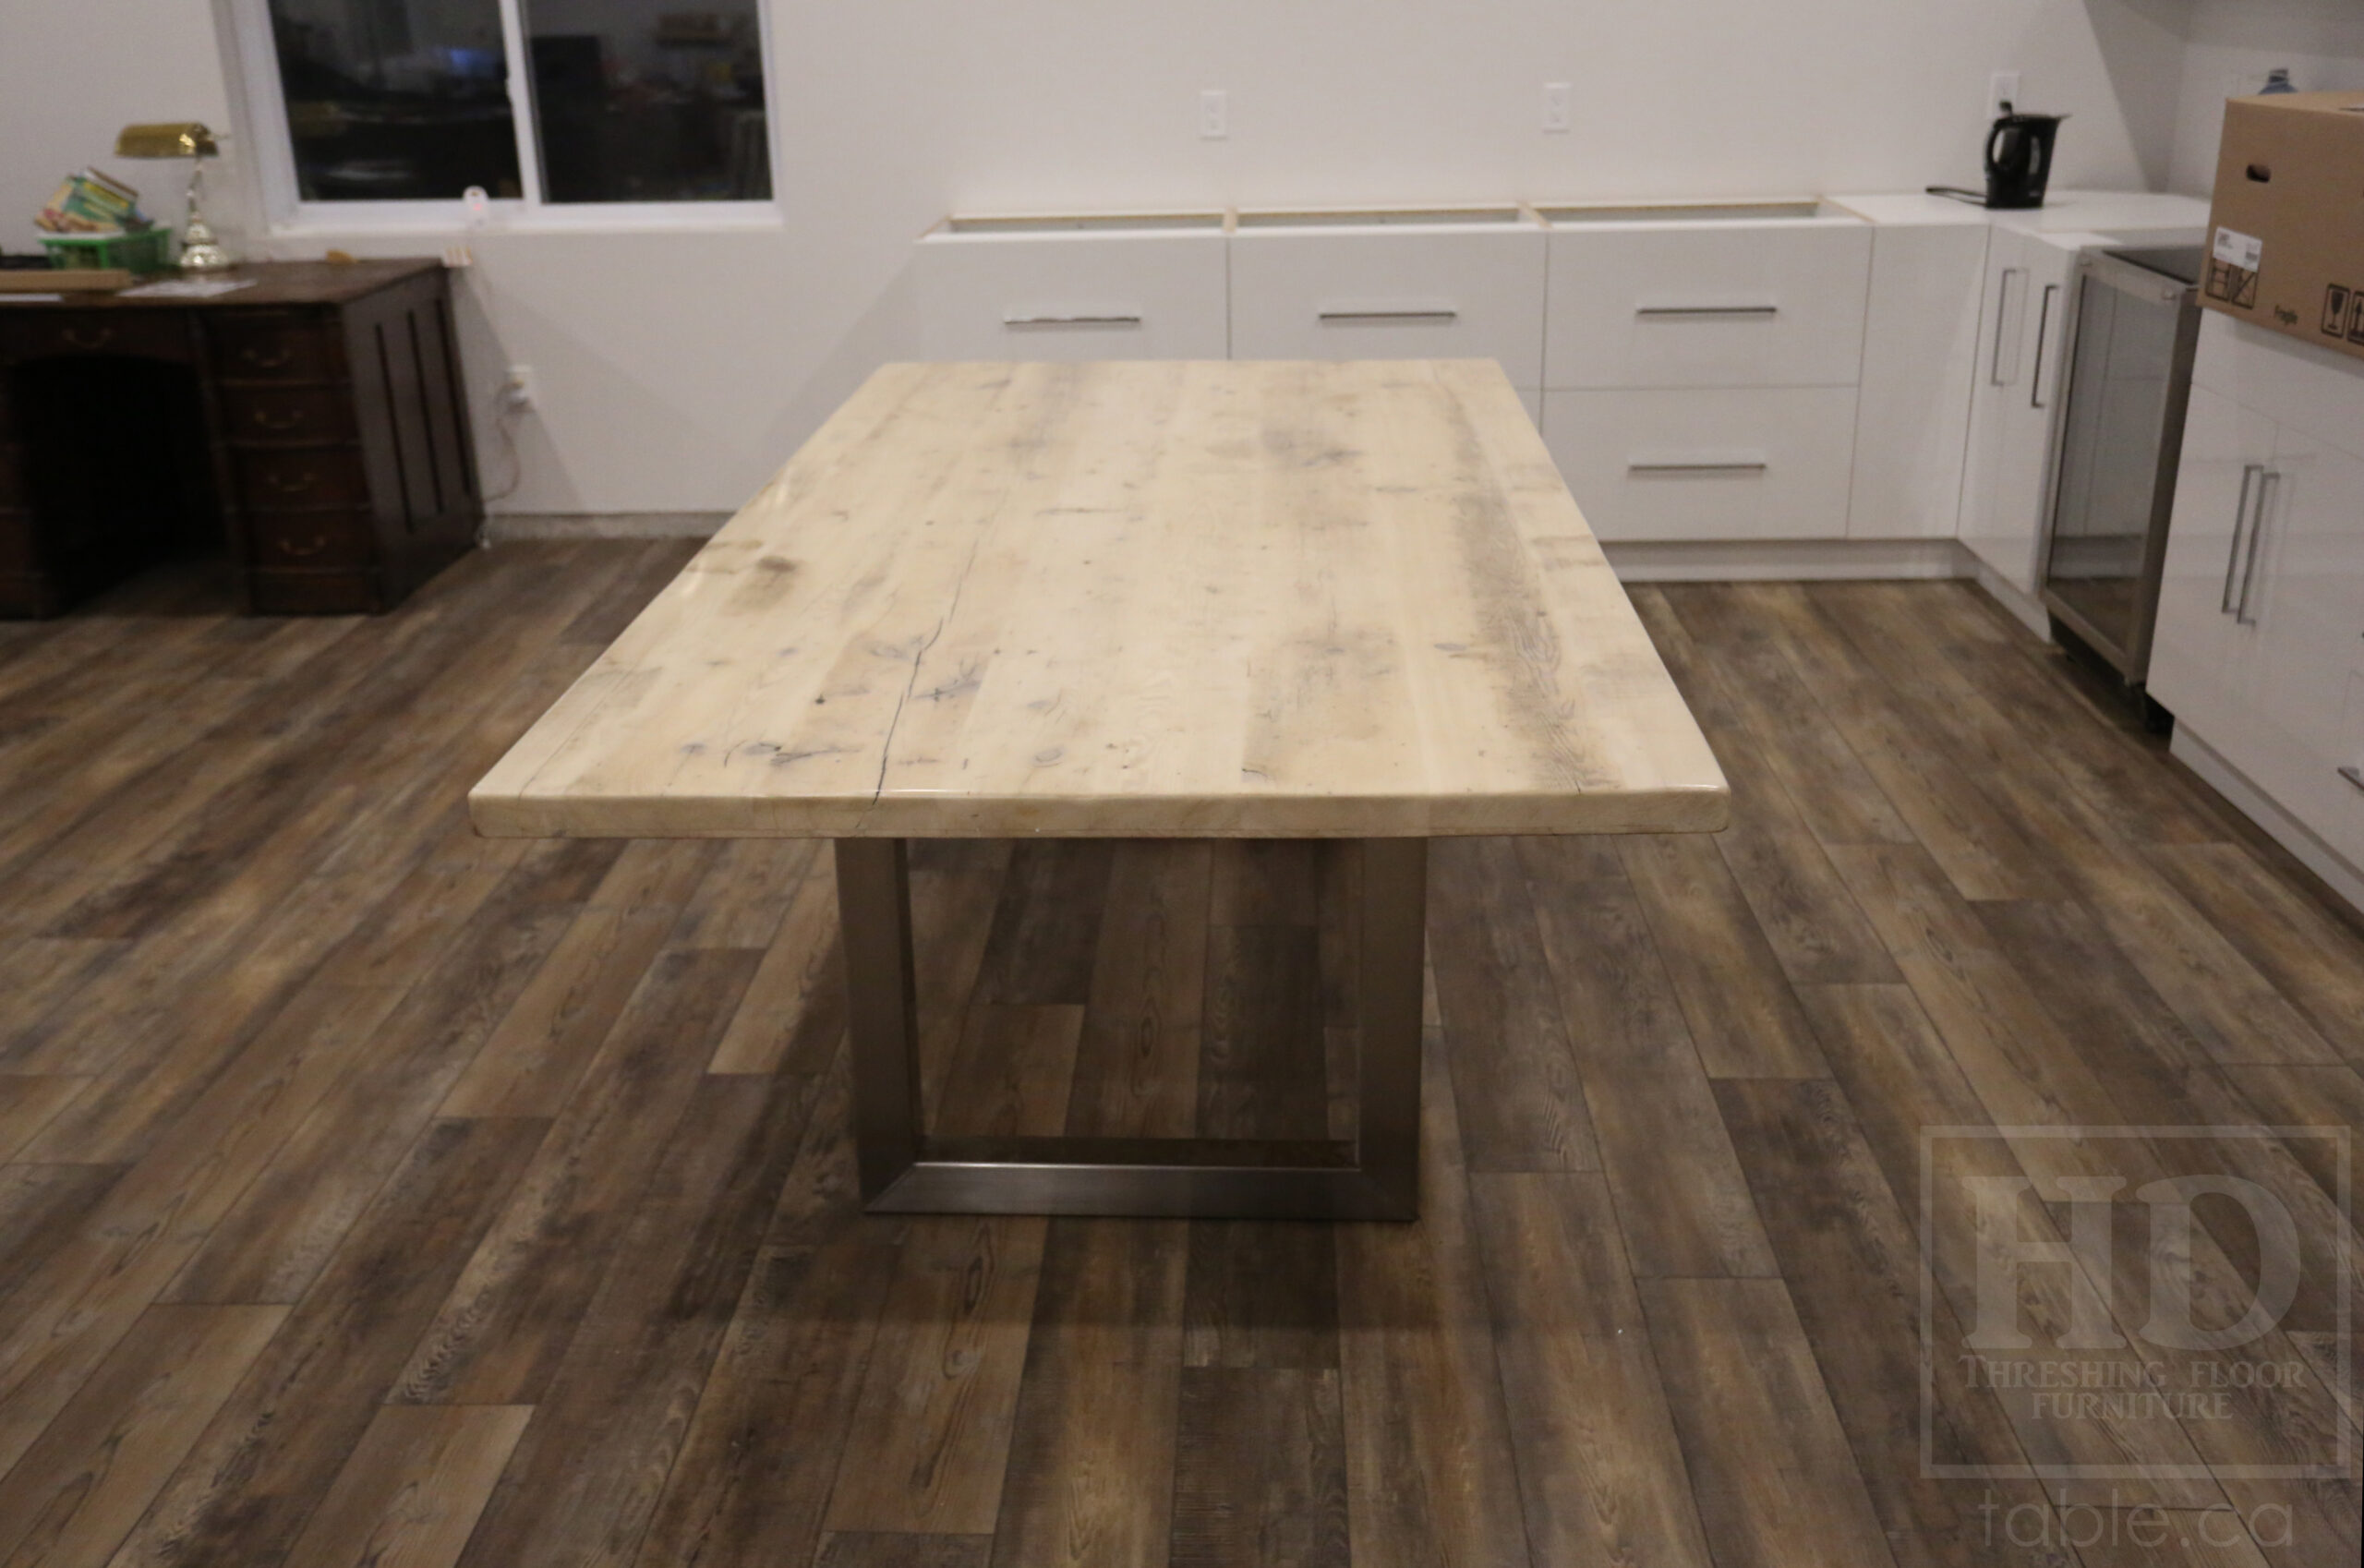 Project details: 8' Ontario Barnwood Boardroom Table - 48" wide – Stainless Steel U Shaped Base – Reclaimed Old Growth Hemlock Threshing Floor Construction – No bread-edge boards - Original edges & distressing maintained – Bleached Option - Premium epoxy + satin polyurethane finish - www.table.ca